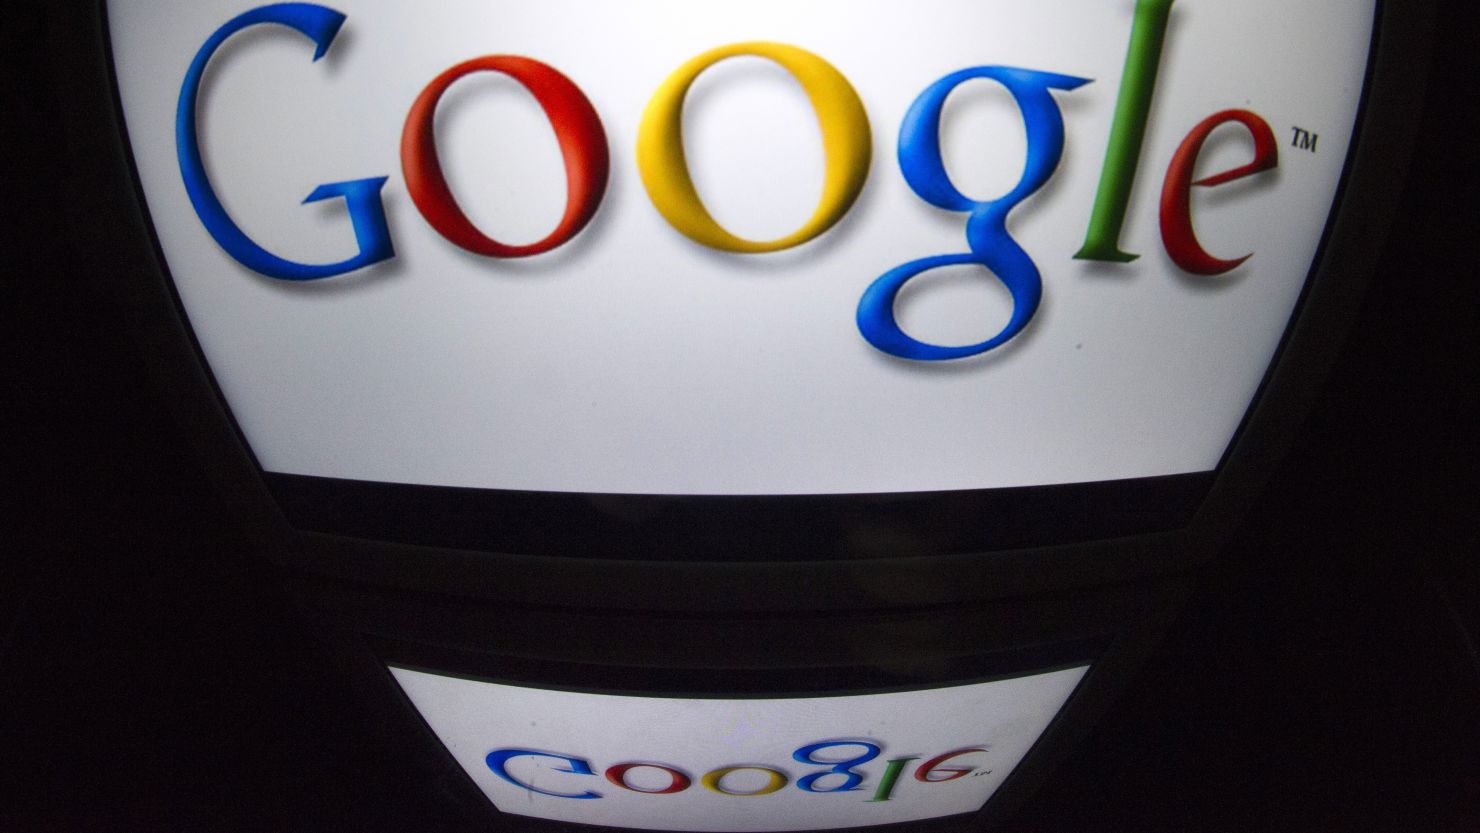 Google will label its own specialist search services and provide "visible" links to rival search engines